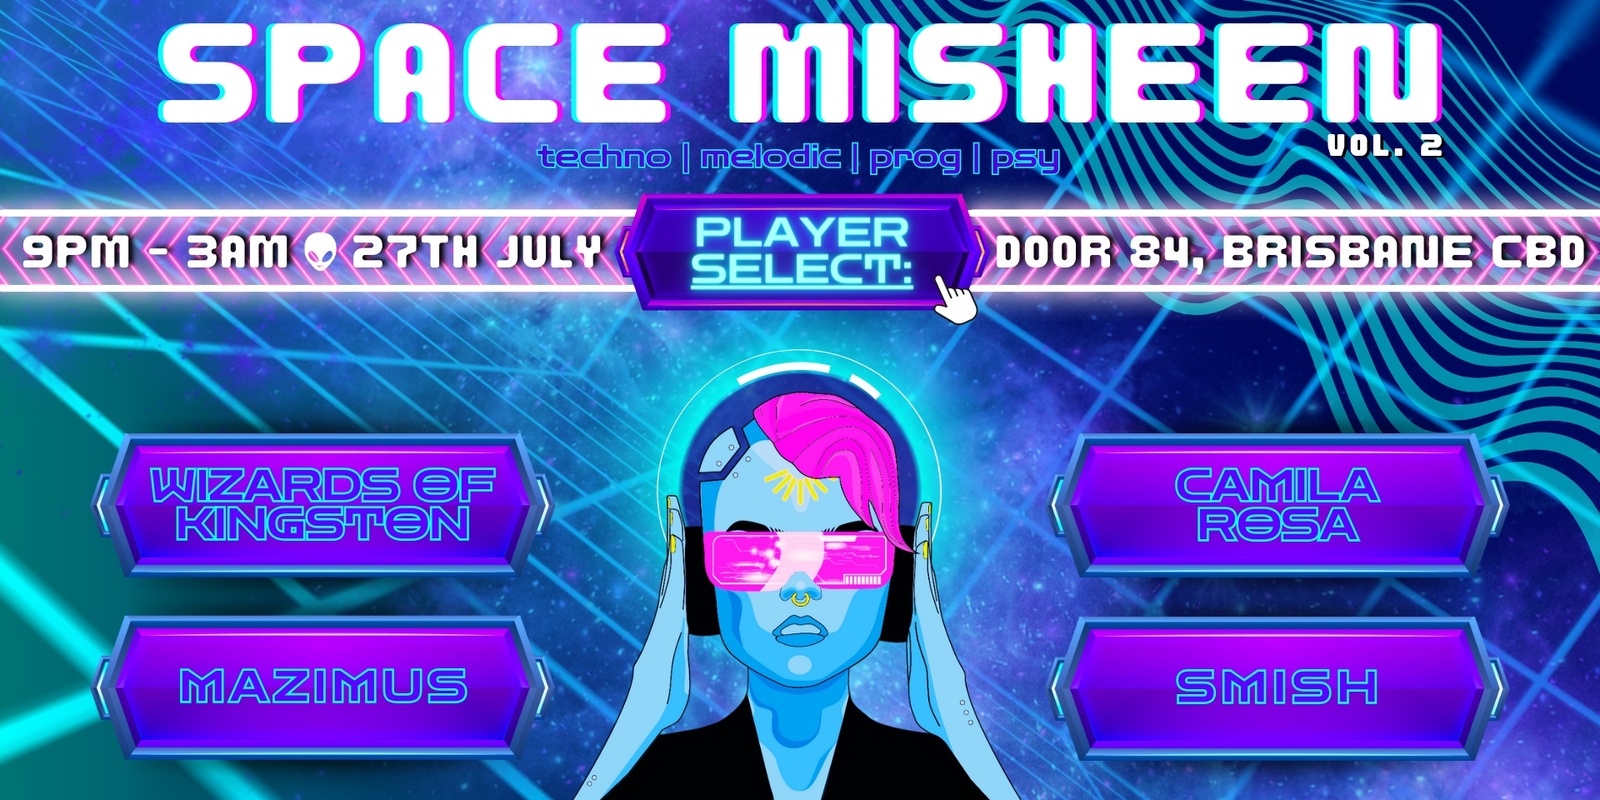 Banner image for Space Misheen Vol. 2